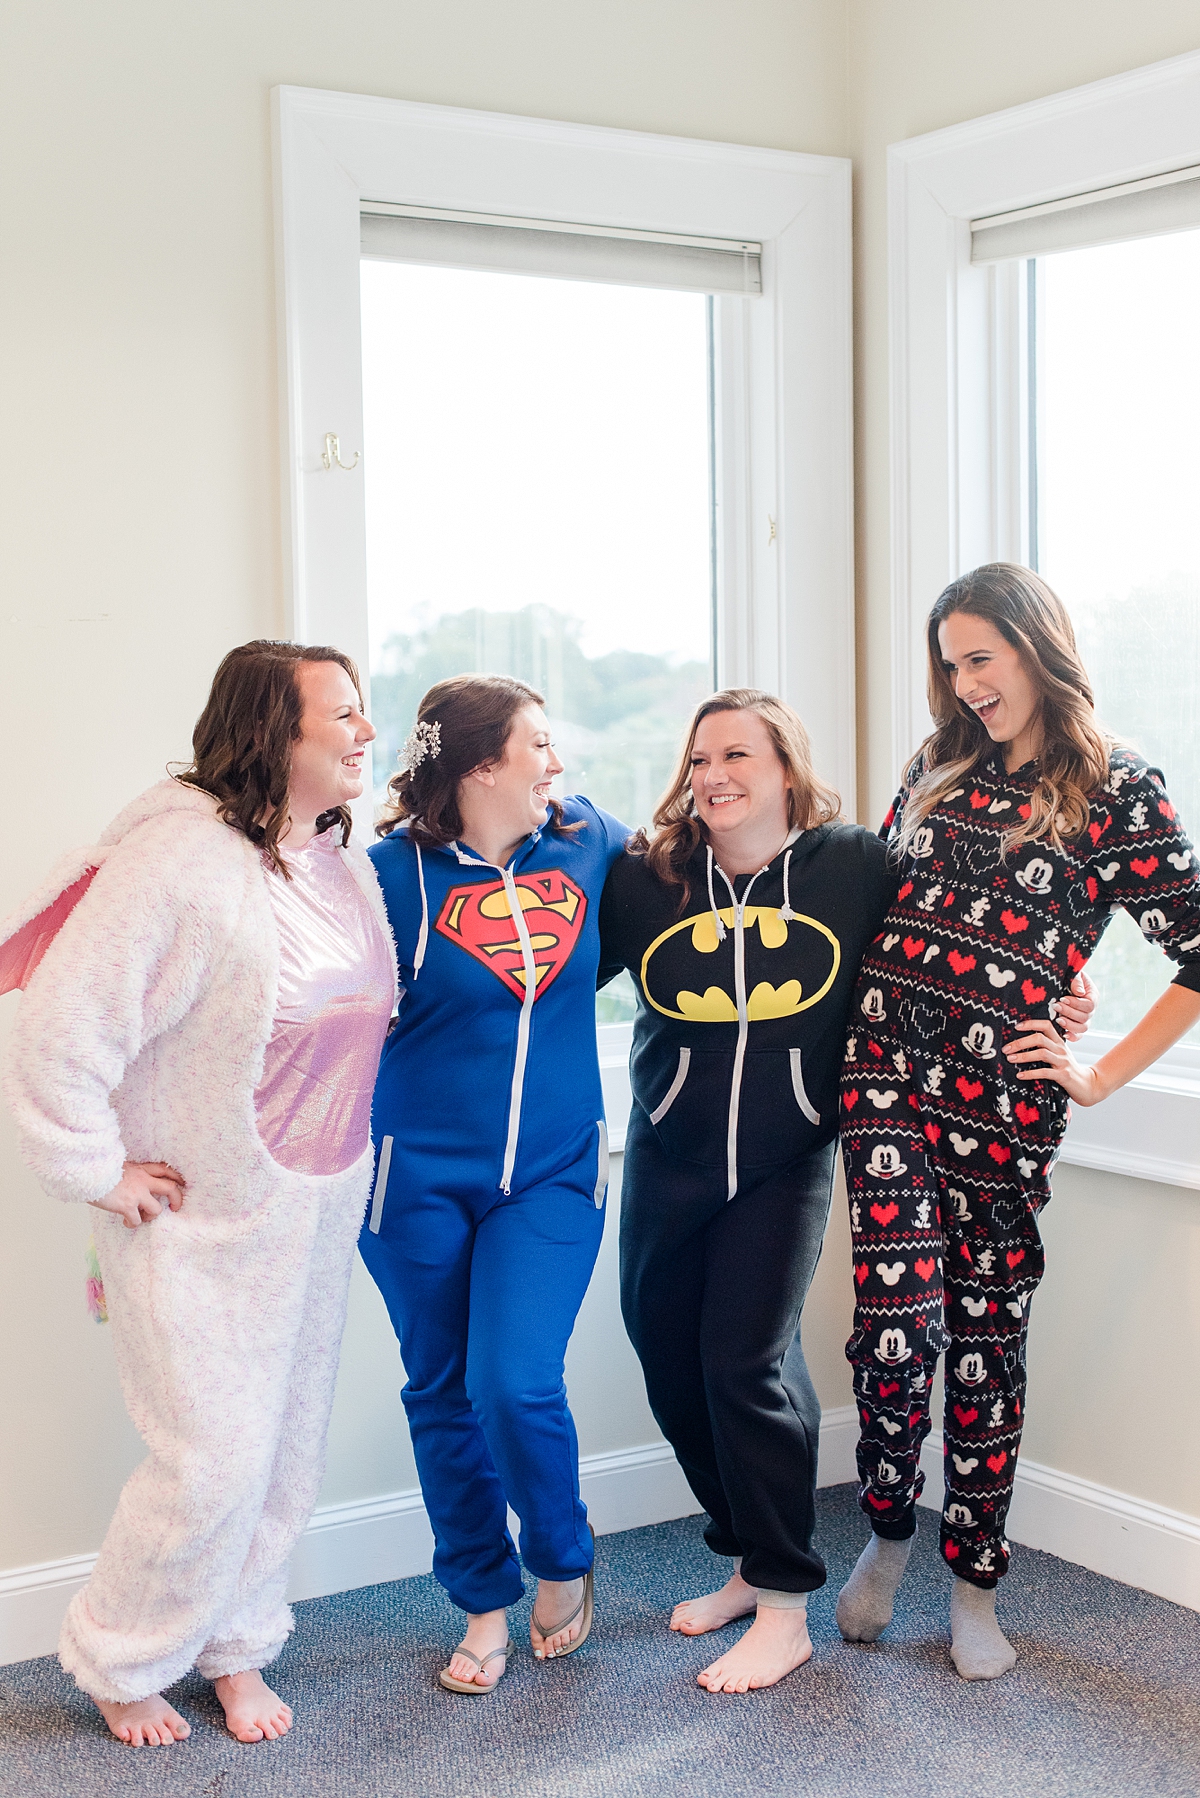 Bridal Party Onesies at The Dominion Club. Wedding Photography by Richmond Wedding Photographer Kailey Brianne Photography.